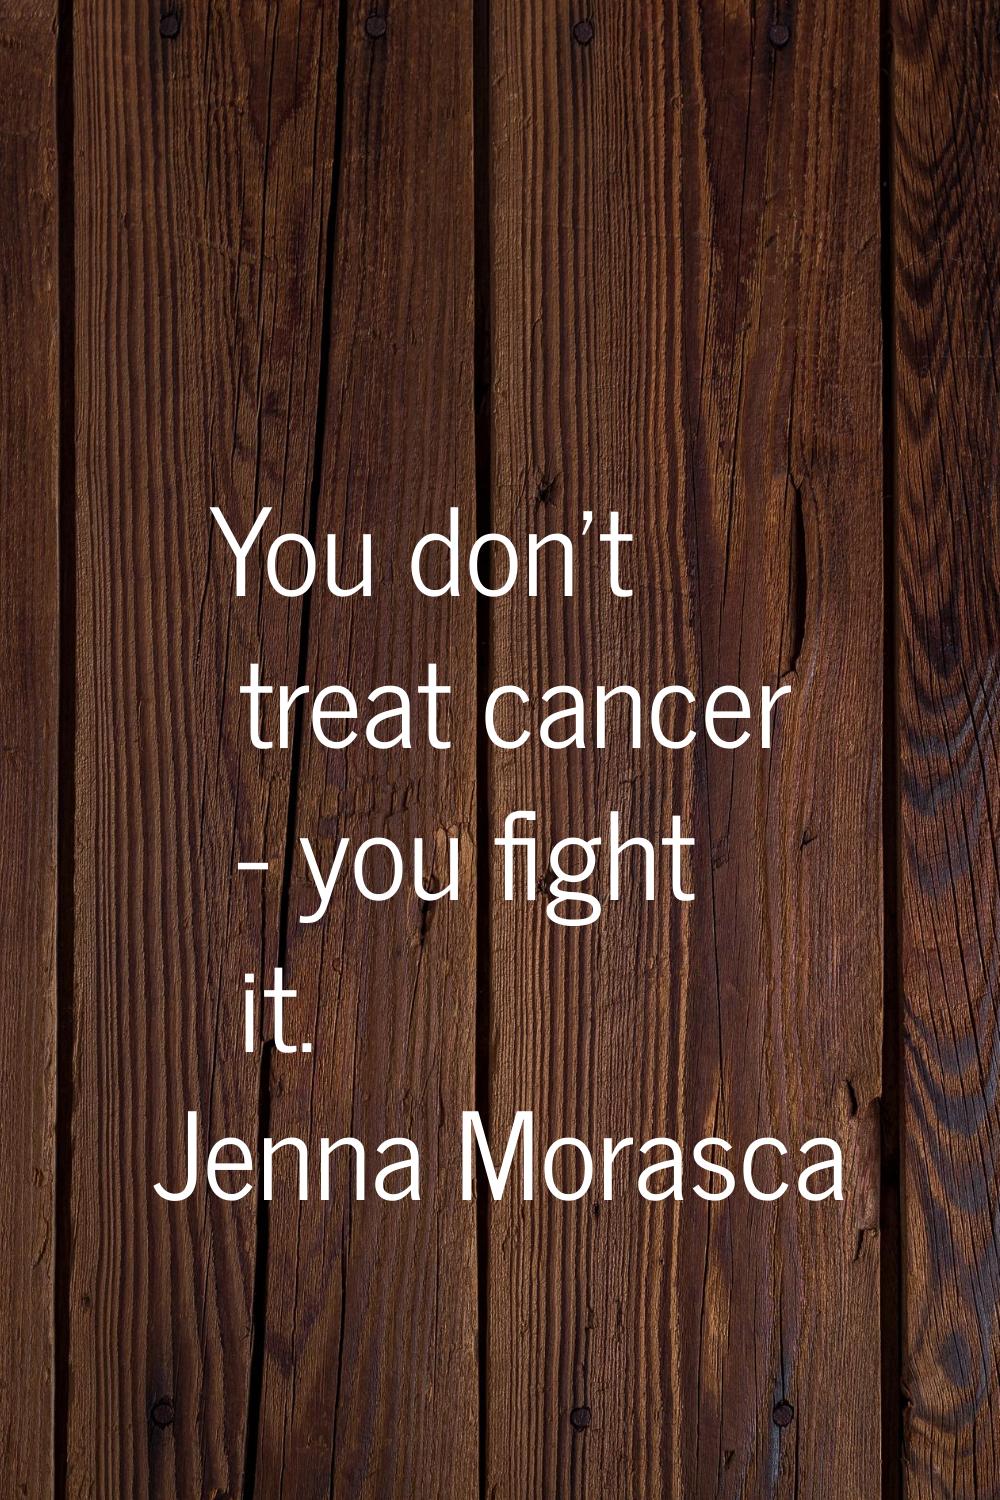 You don't treat cancer - you fight it.